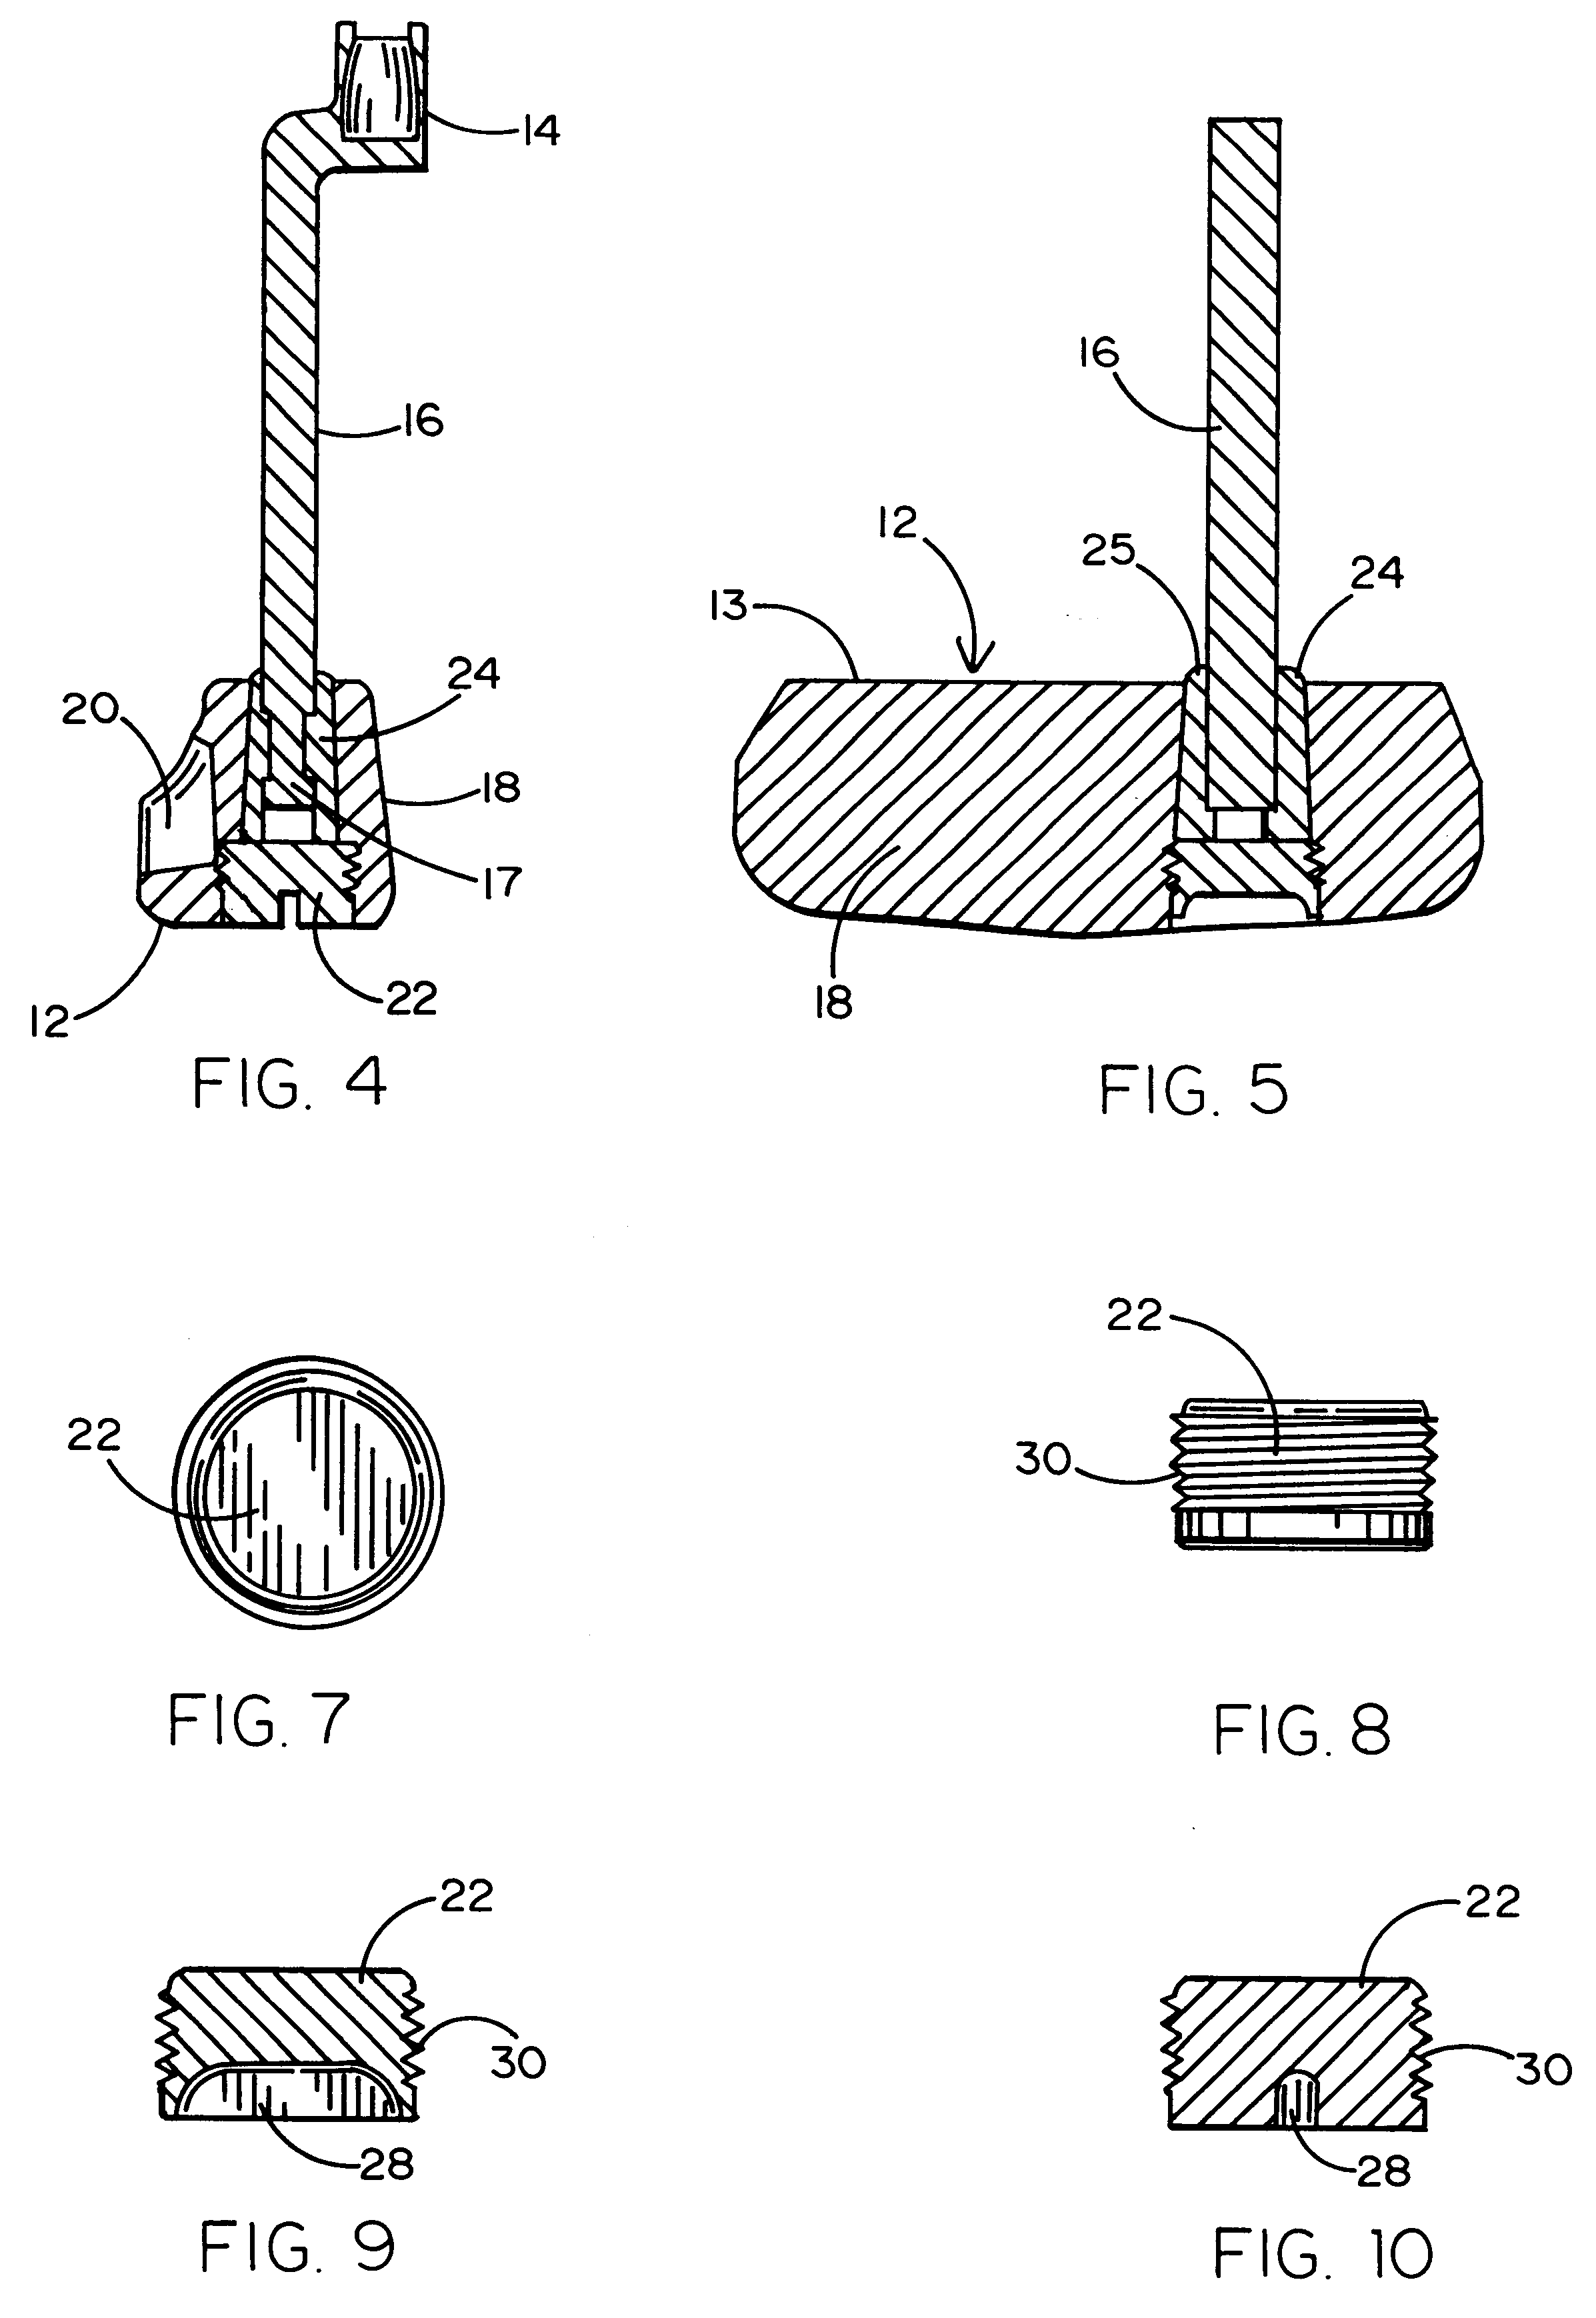 Device for altering the angle between the shaft and the head of a golf club